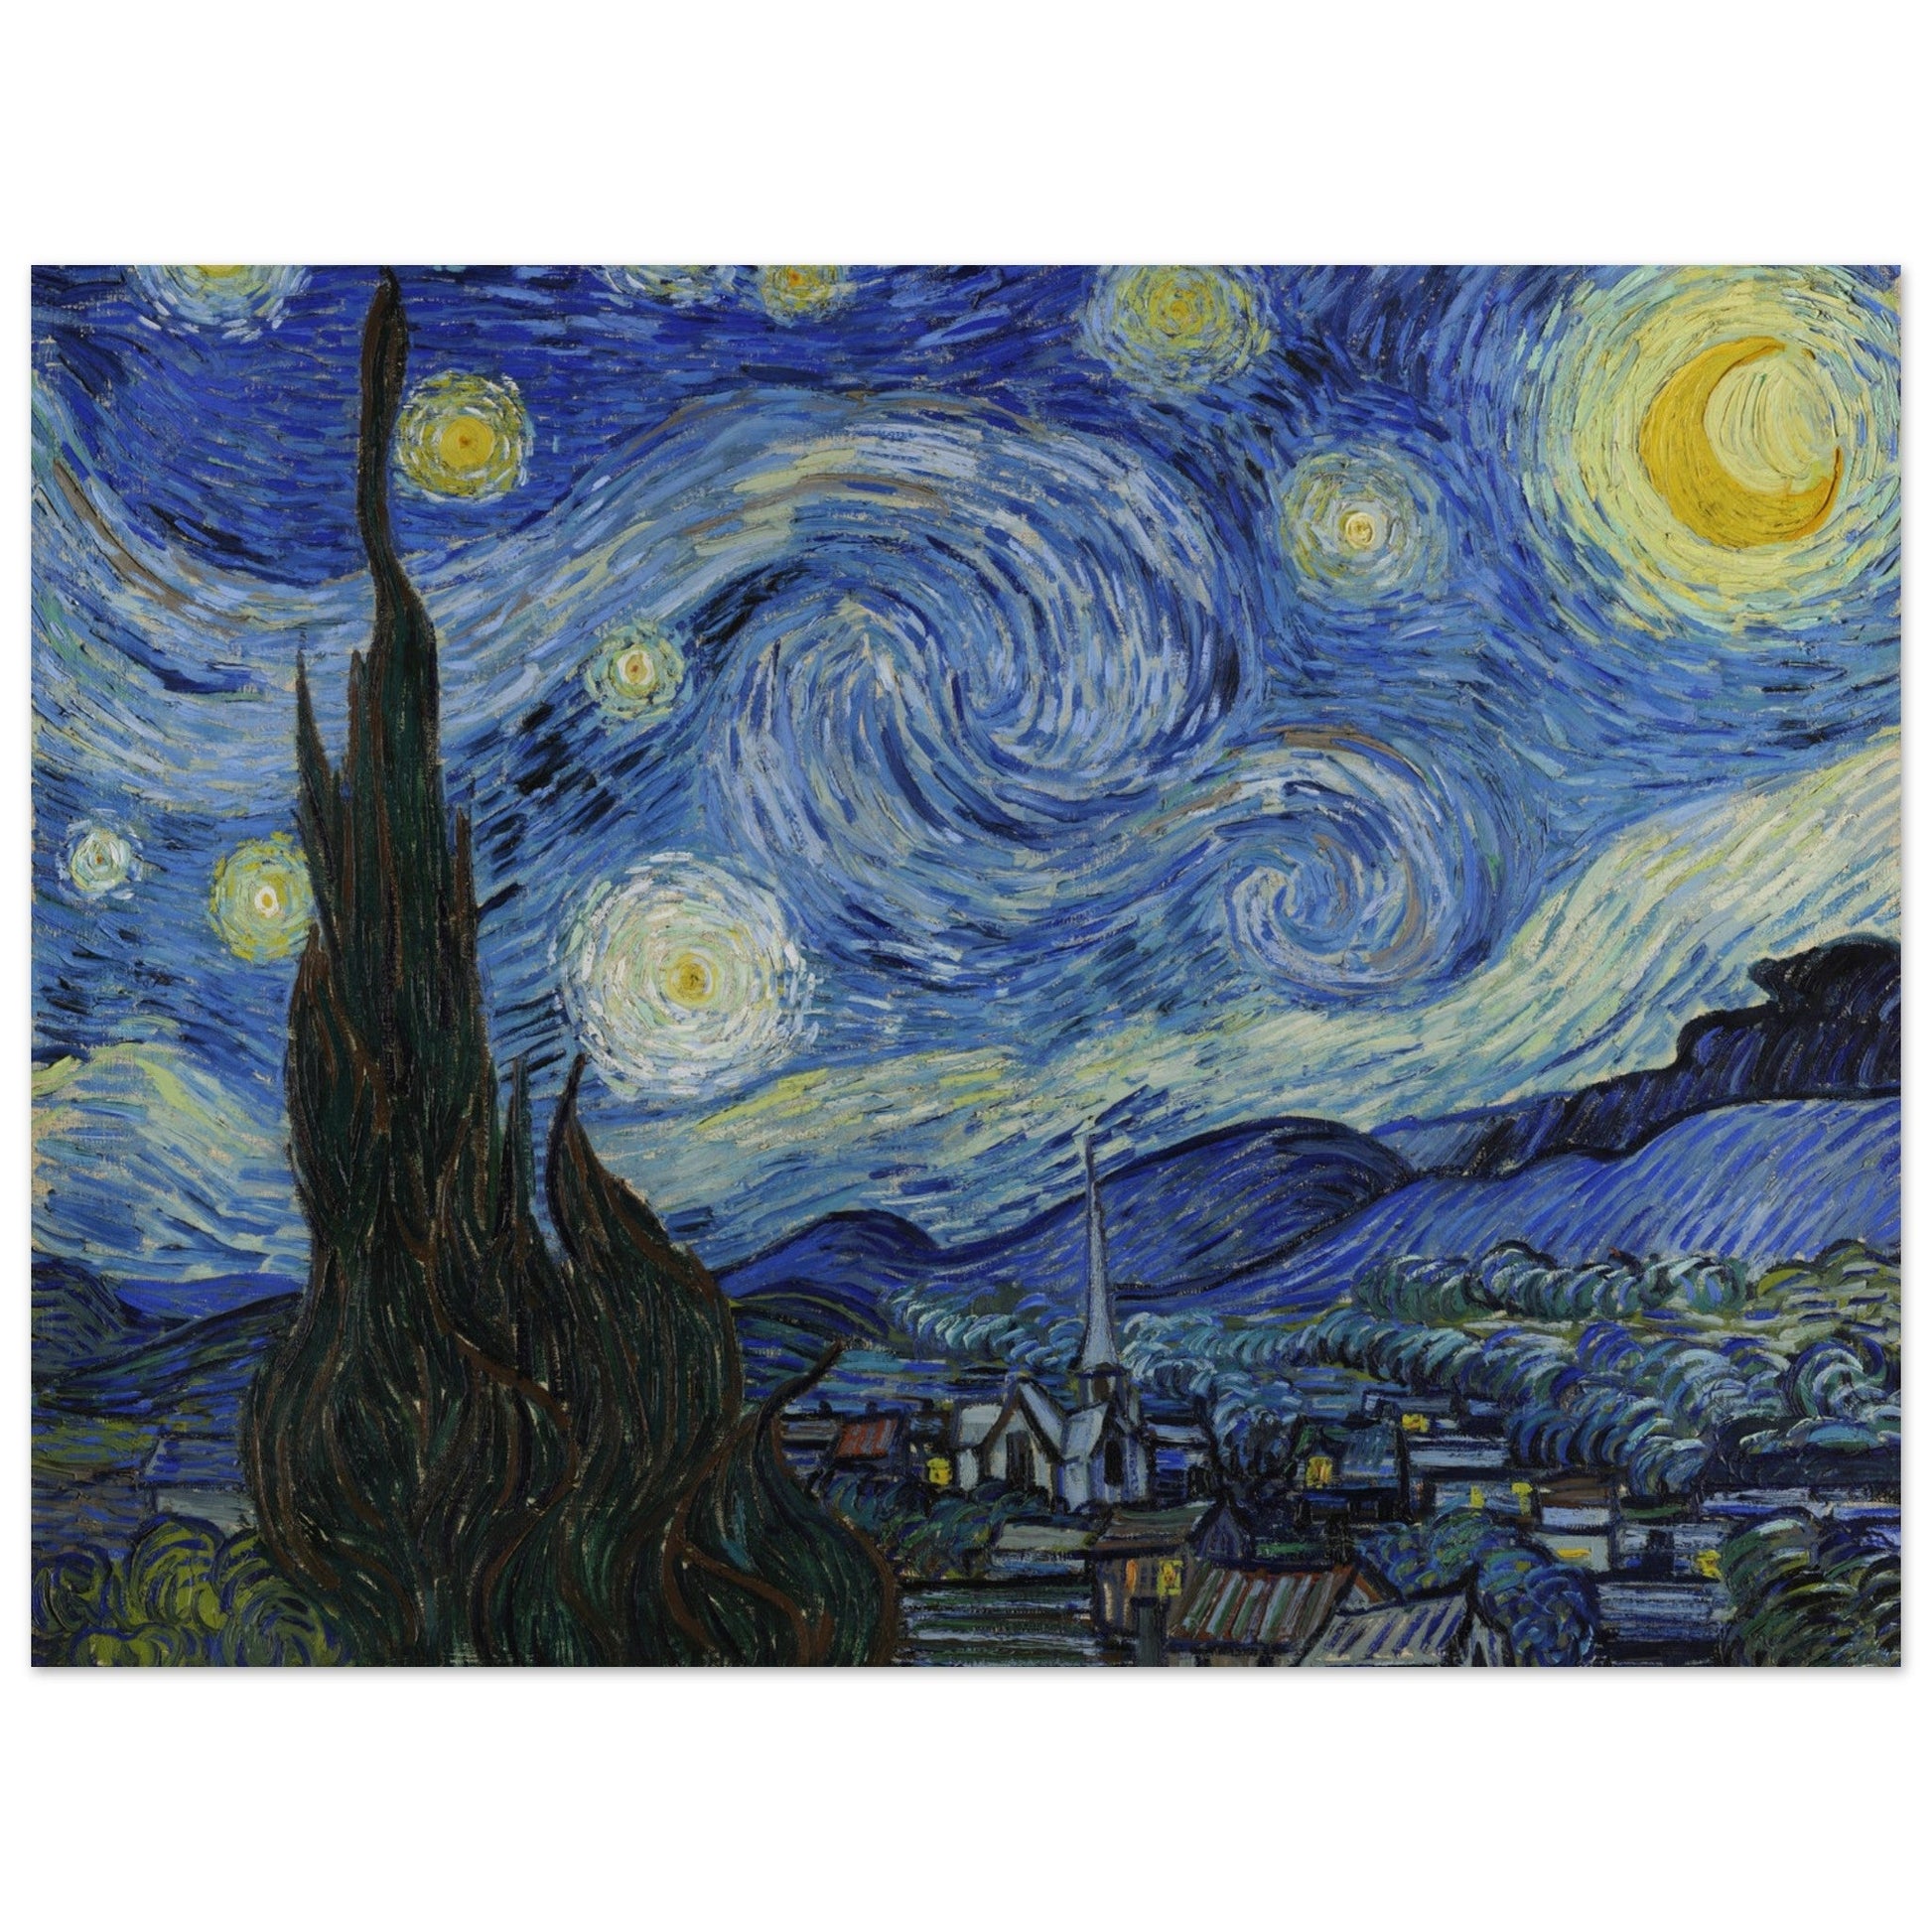 Starry Night" by Van Gogh is a captivating masterpiece that will enhance any living space. This high quality poster showcases the artist's iconic painting, making it the perfect addition to your home.